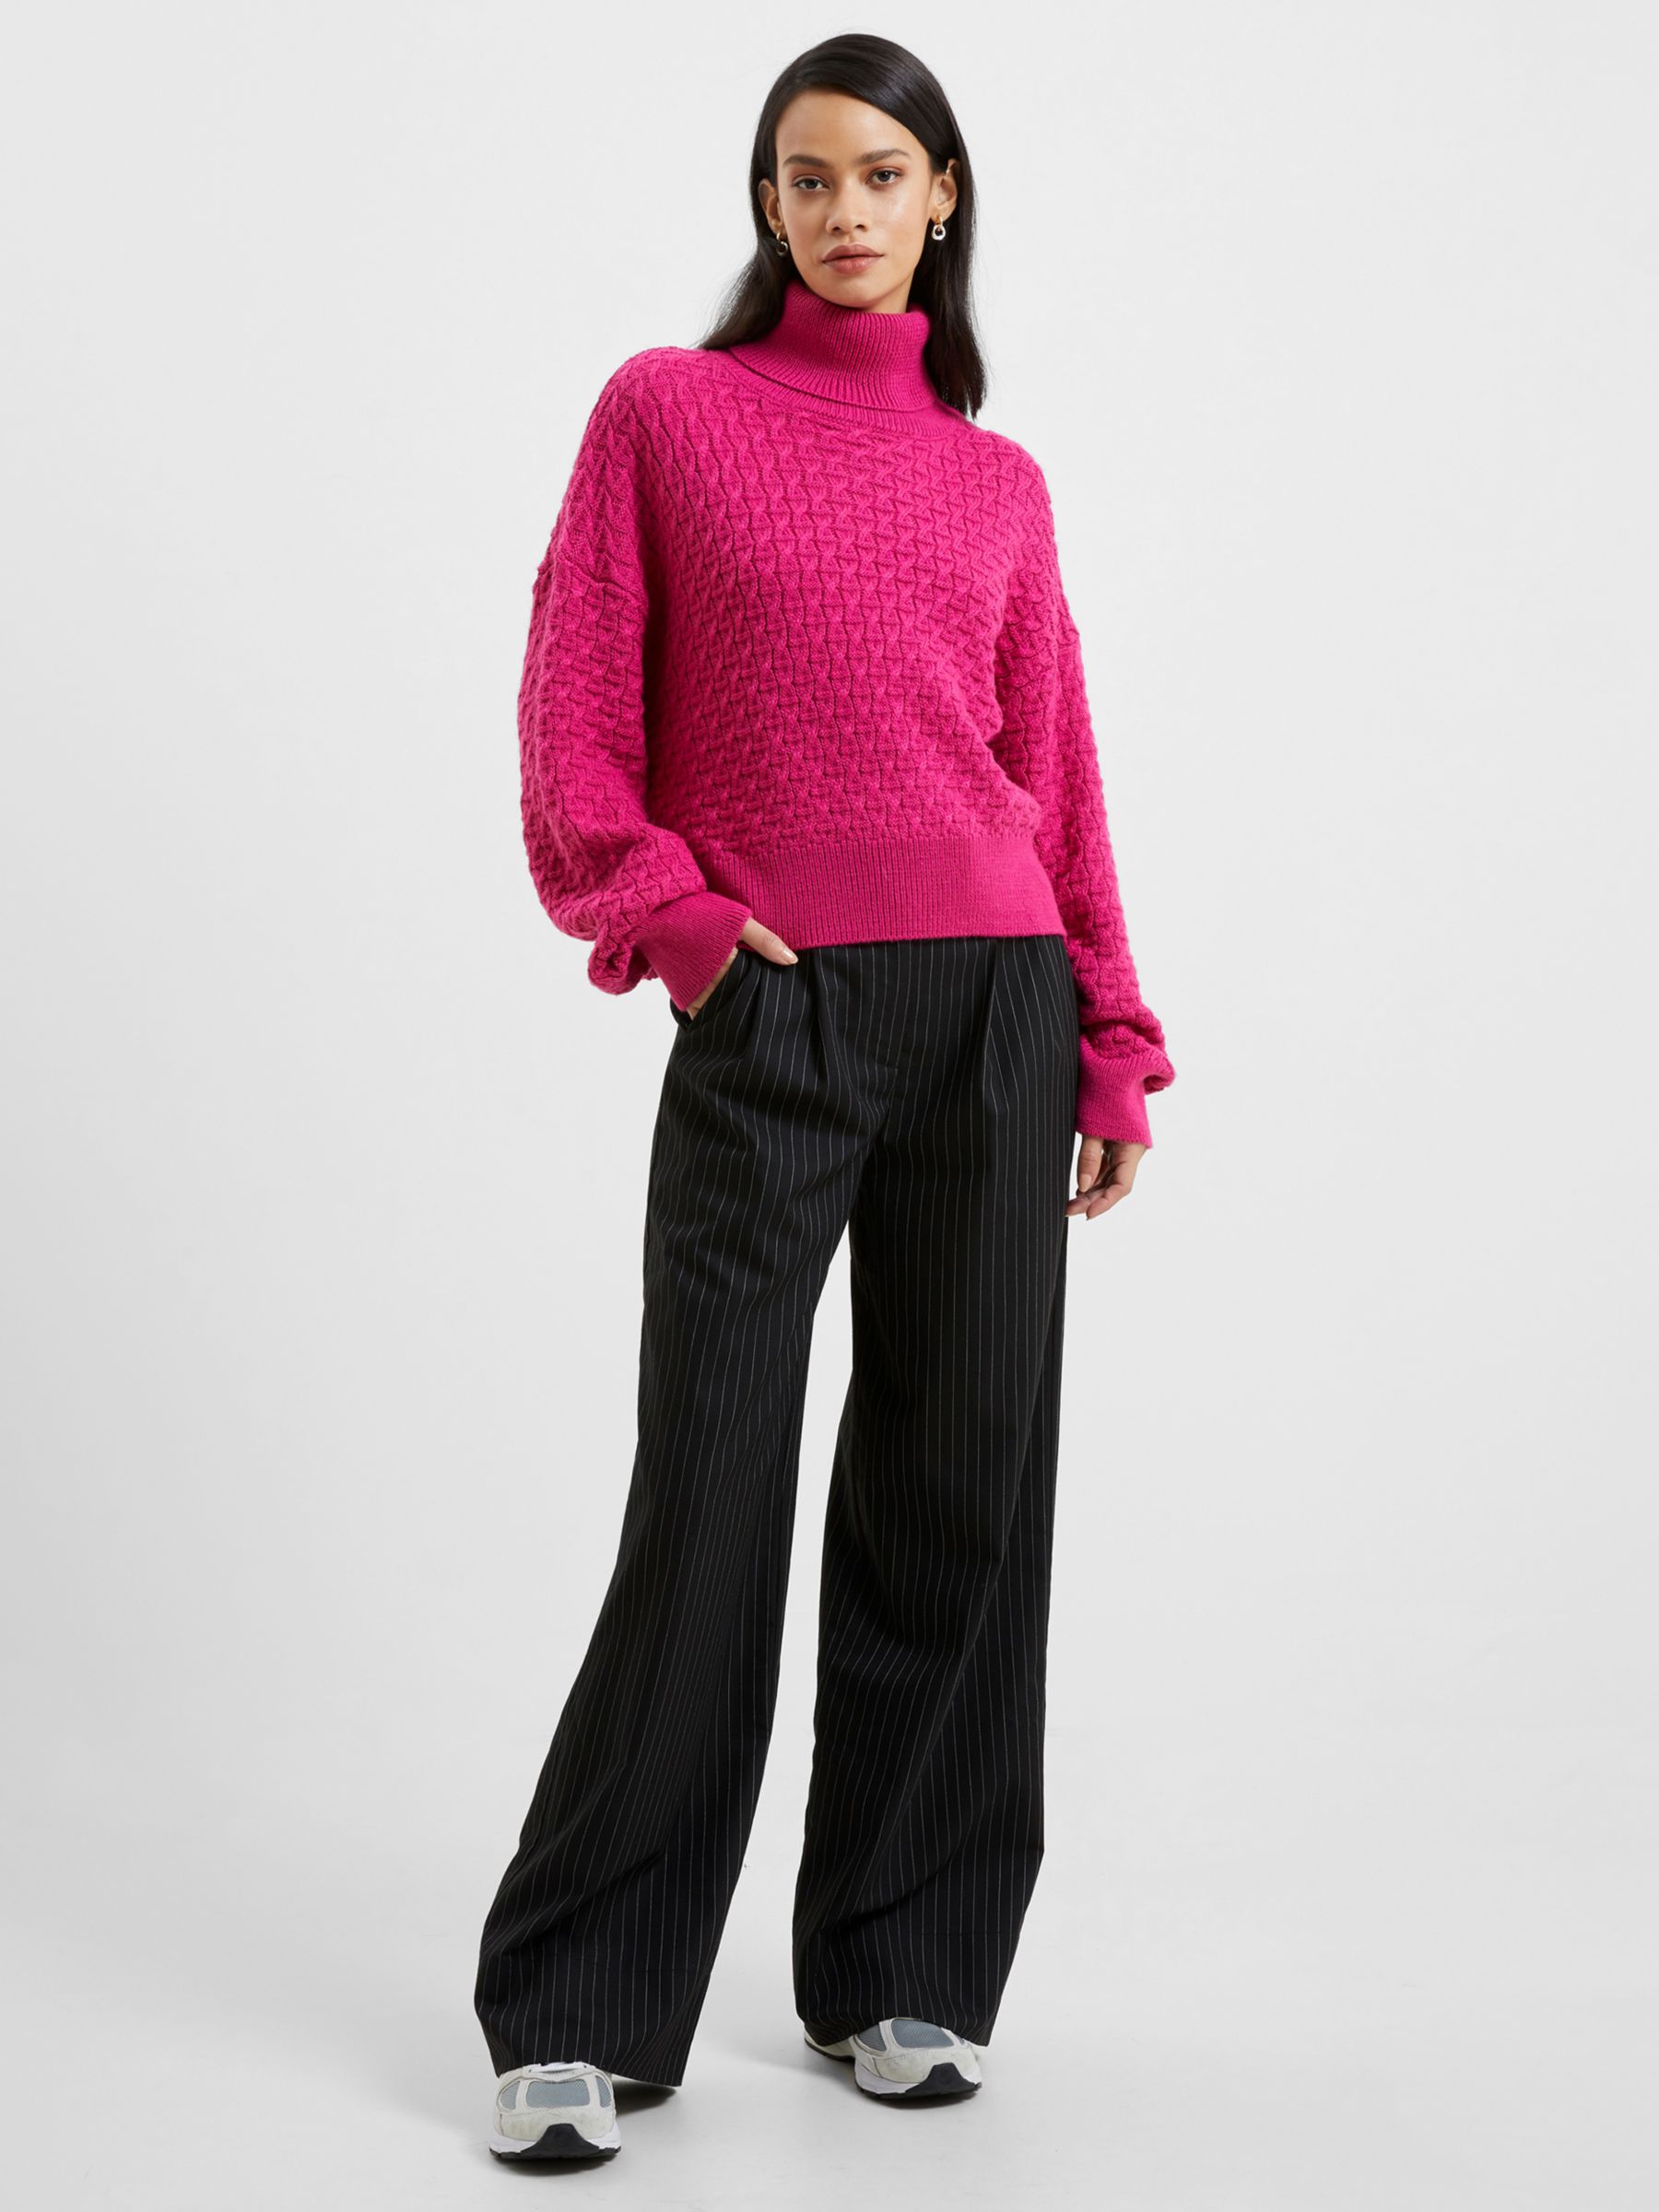 French Connection Jini Cable Knit Jumper, Fuchsia at John Lewis & Partners